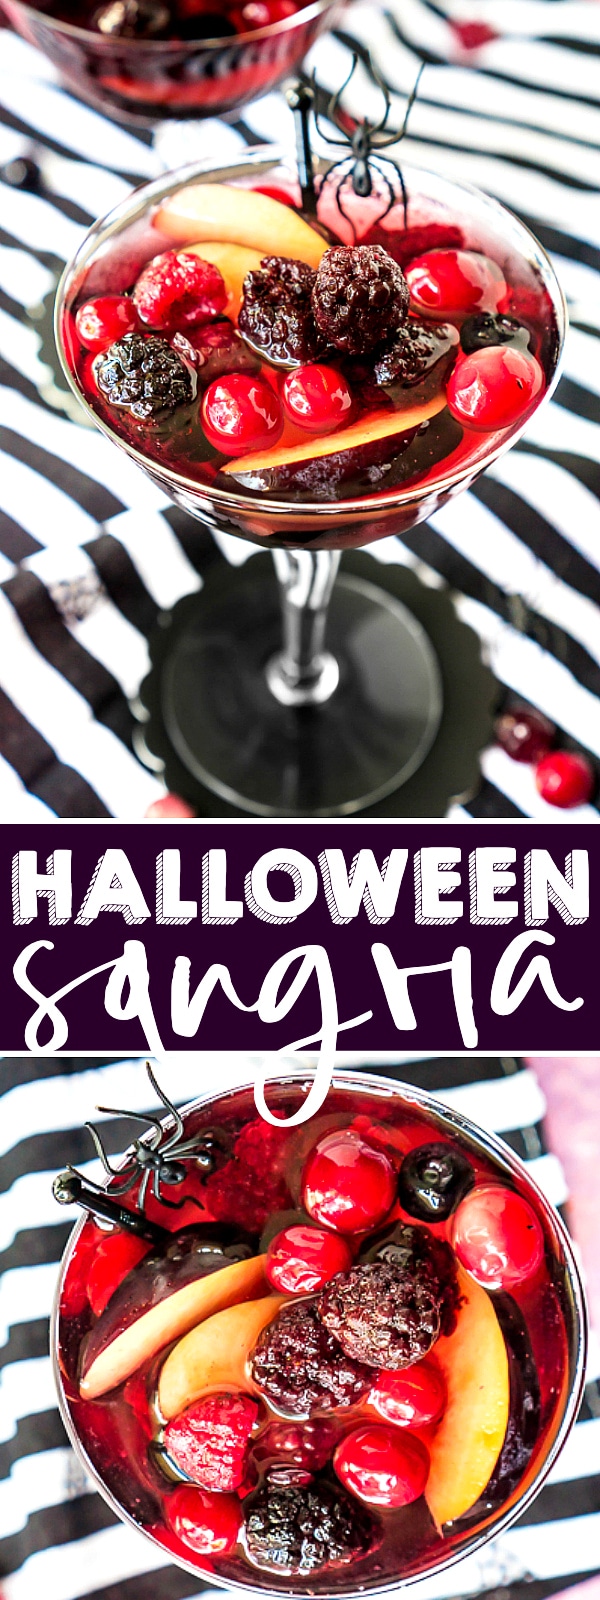 HALLOWEEN SANGRIA - A blackberry and cranberry sangria with shades of purple, pink and red that makes a stunning Halloween punch! Garnish glasses with spiders to give your guests a trick with a spooky Halloween cocktail surprise!  | The Love Nerds #halloweendrinkrecipe #halloweencocktail #cranberrysangria